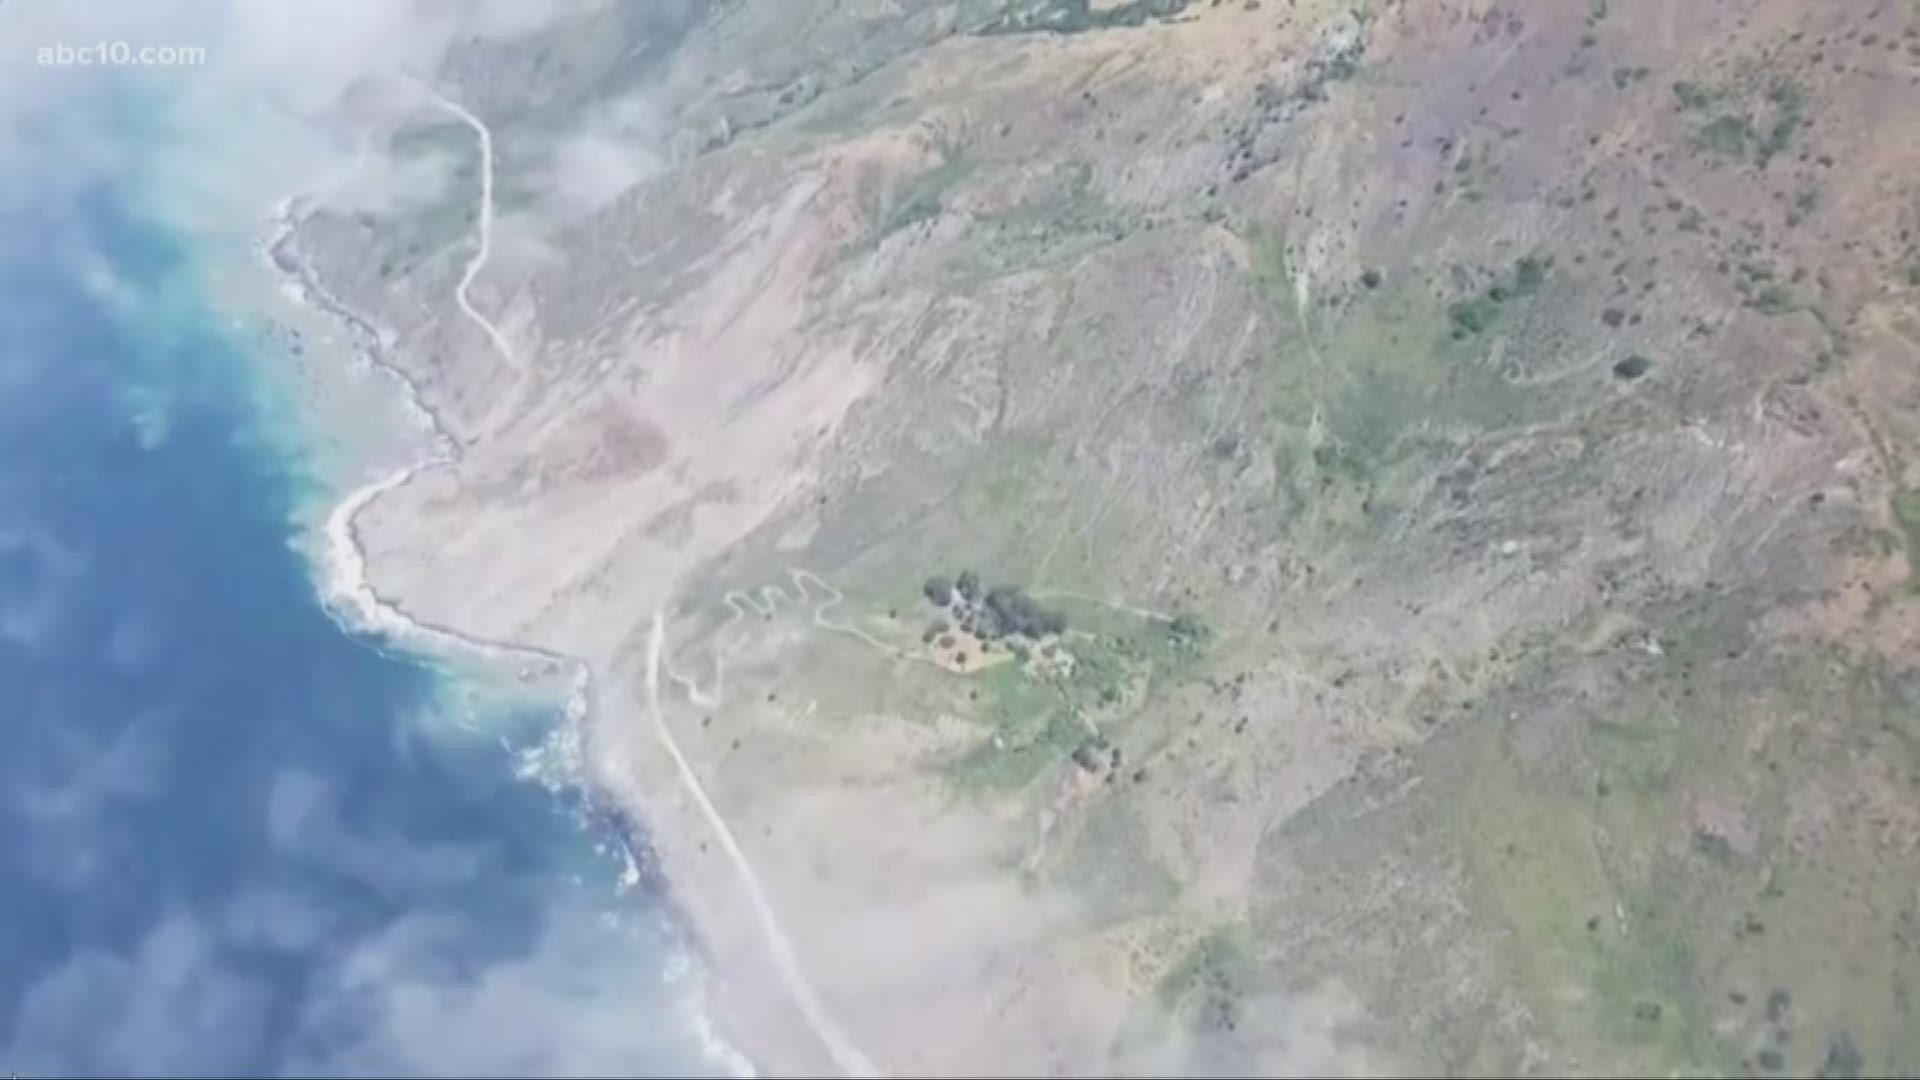 A scenic stretch of Highway 1 in a popular tourist area along the California coast reopened to traffic Wednesday, more than a year after it was blocked by a massive landslide, officials said.